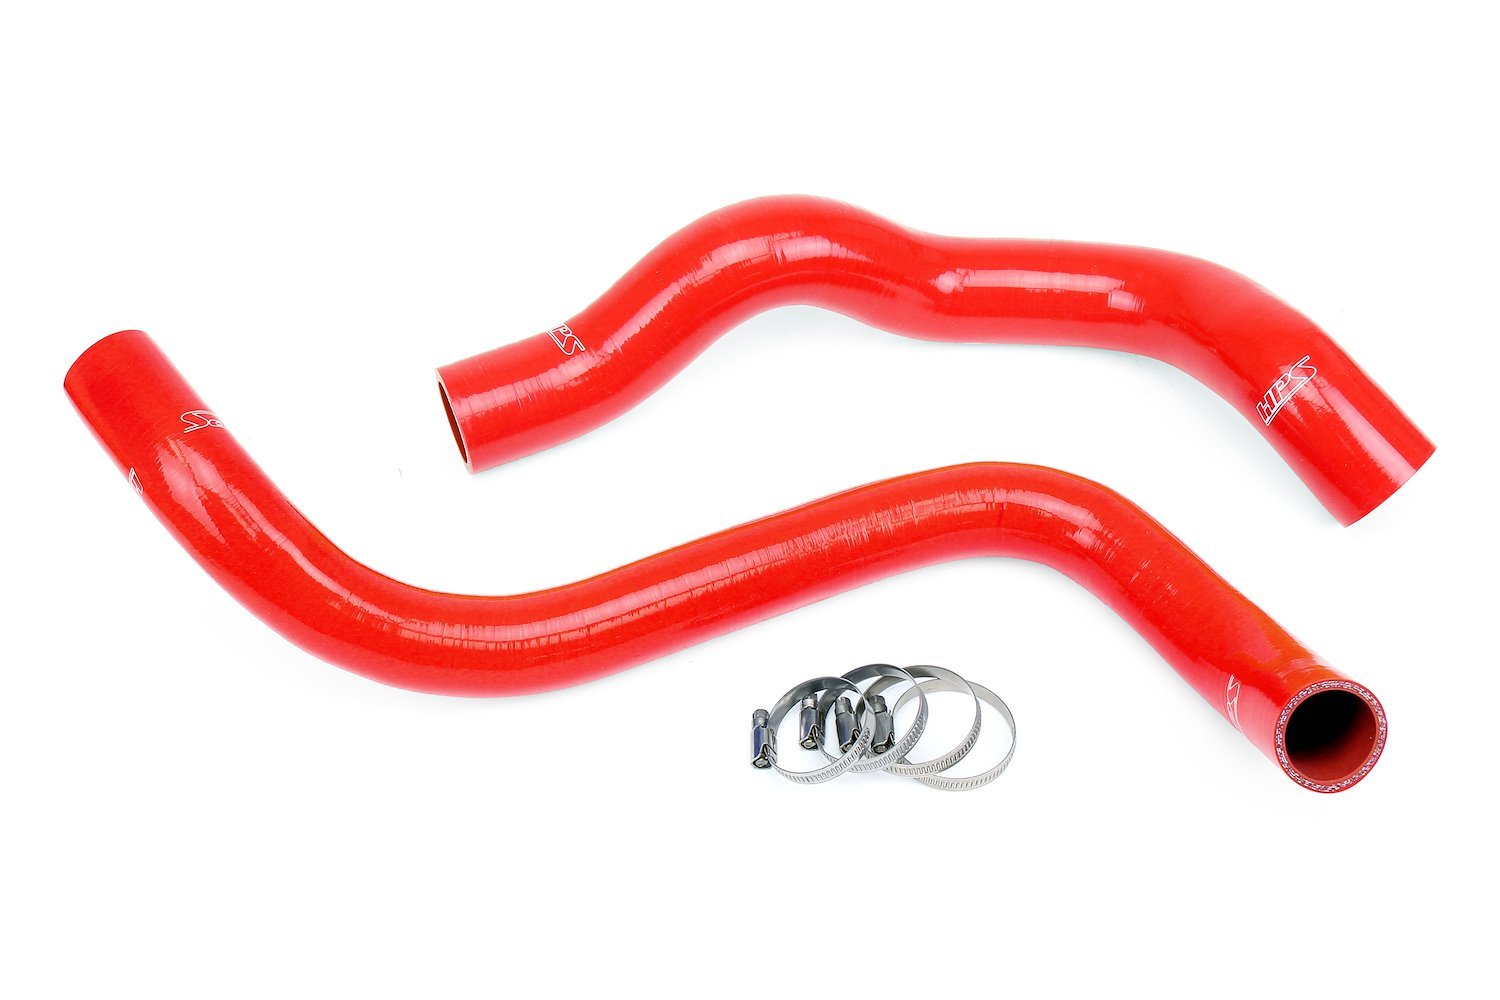 57-1903-RED Radiator Hose Kit, 3-Ply Reinforced Silicone, Replaces Rubber Radiator Coolant Hoses